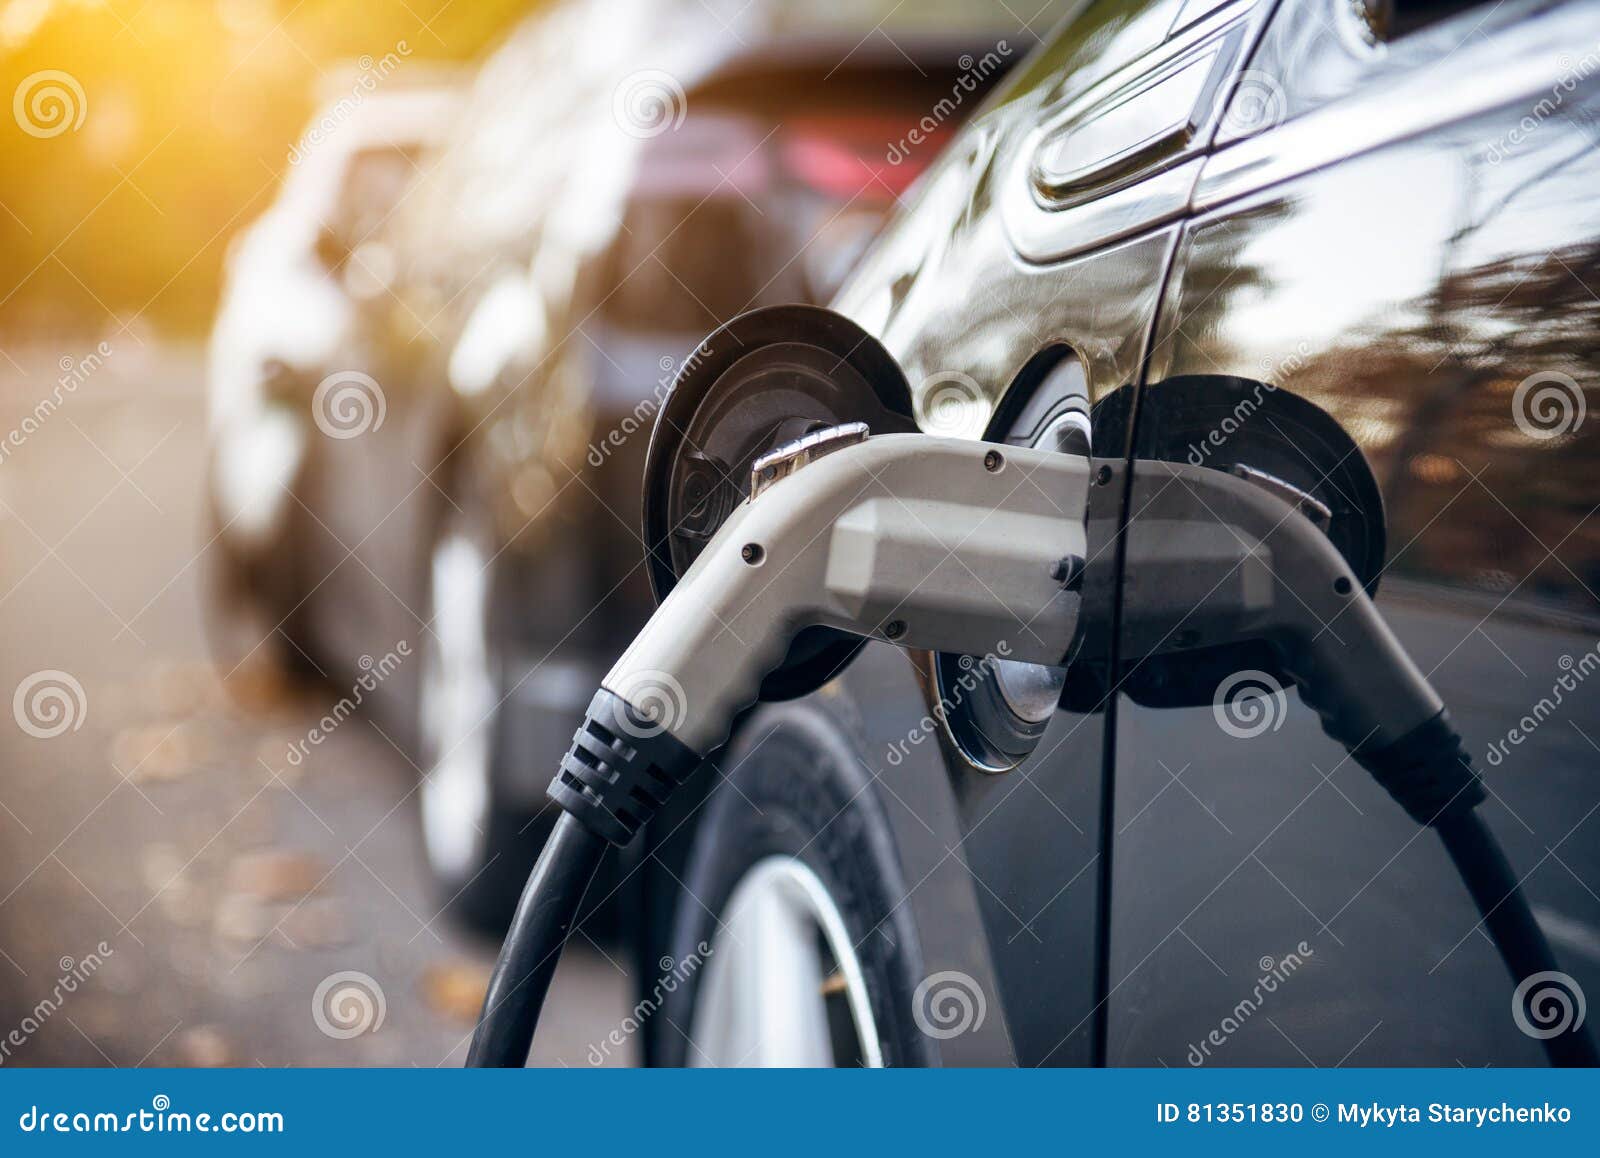 Electric Car Charging on Parking Lot with Electric Car Charging Station